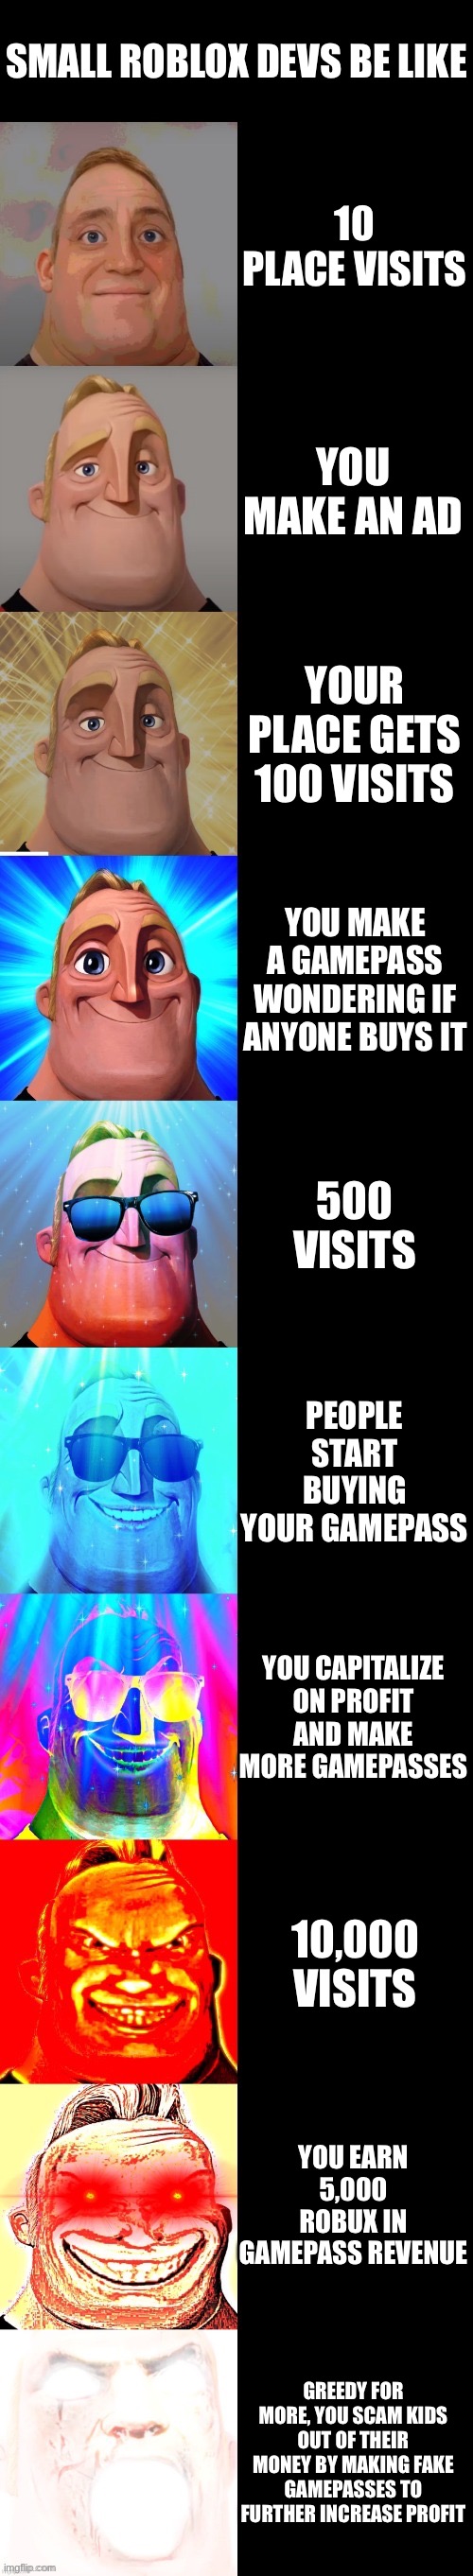 mr incredible becoming canny | SMALL ROBLOX DEVS BE LIKE; 10 PLACE VISITS; YOU MAKE AN AD; YOUR PLACE GETS 100 VISITS; YOU MAKE A GAMEPASS WONDERING IF ANYONE BUYS IT; 500 VISITS; PEOPLE START BUYING YOUR GAMEPASS; YOU CAPITALIZE ON PROFIT AND MAKE MORE GAMEPASSES; 10,000 VISITS; YOU EARN 5,000 ROBUX IN GAMEPASS REVENUE; GREEDY FOR MORE, YOU SCAM KIDS OUT OF THEIR MONEY BY MAKING FAKE GAMEPASSES TO FURTHER INCREASE PROFIT | image tagged in mr incredible becoming canny,roblox meme | made w/ Imgflip meme maker